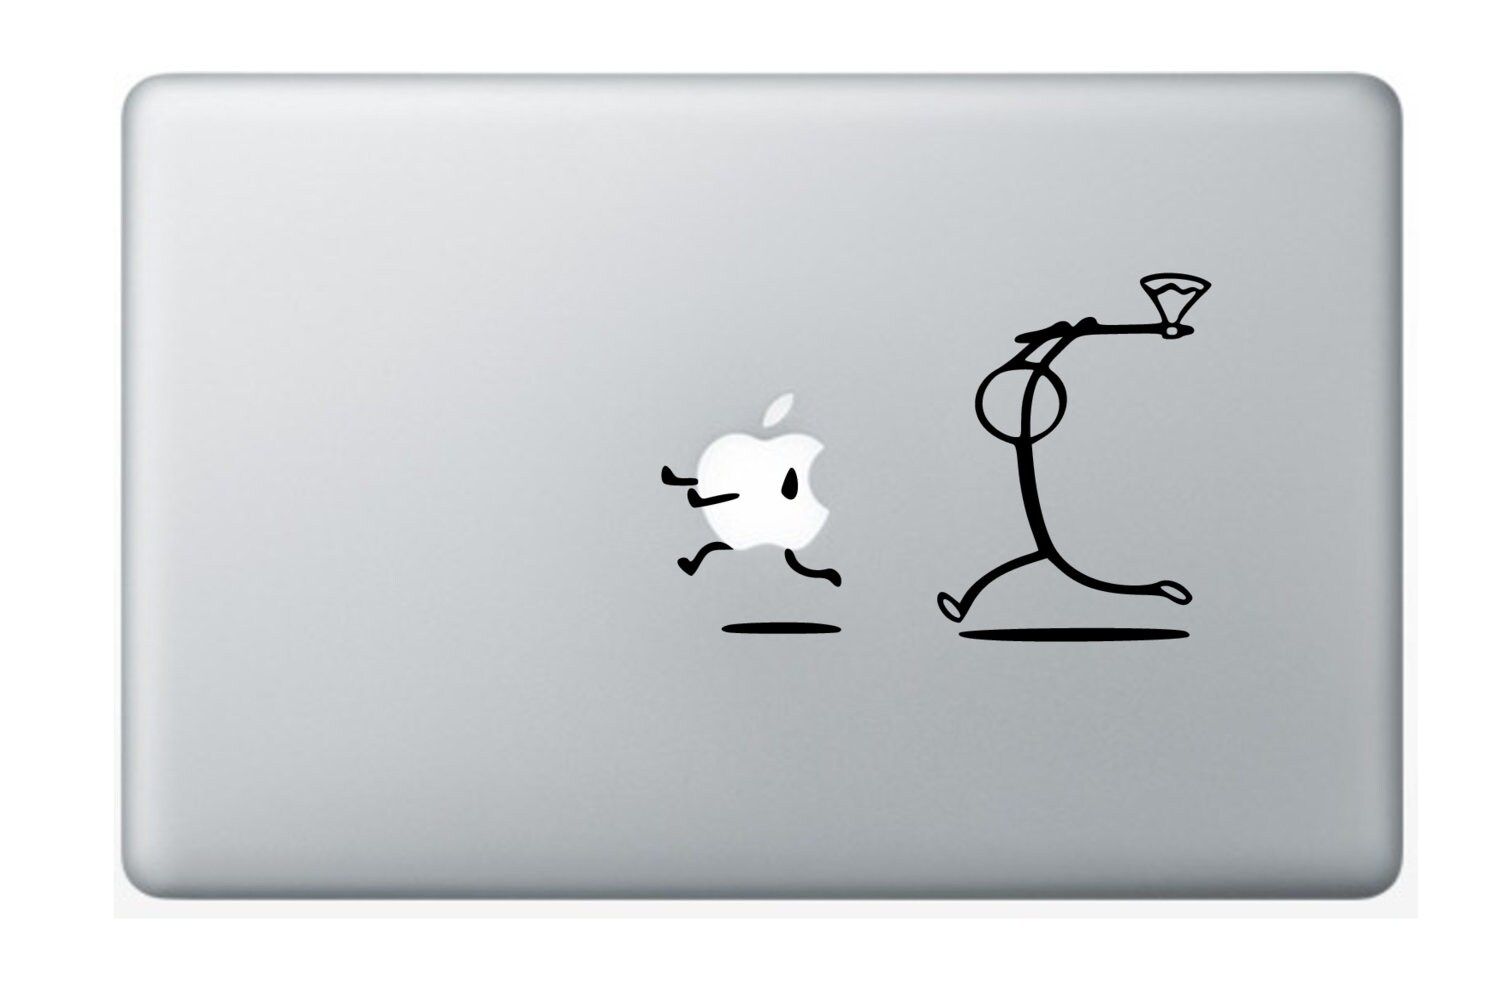 Stickers for Stickman Push Apple MacBook Pro Air Made in FRANCE Same-day  Shipping Isticker 